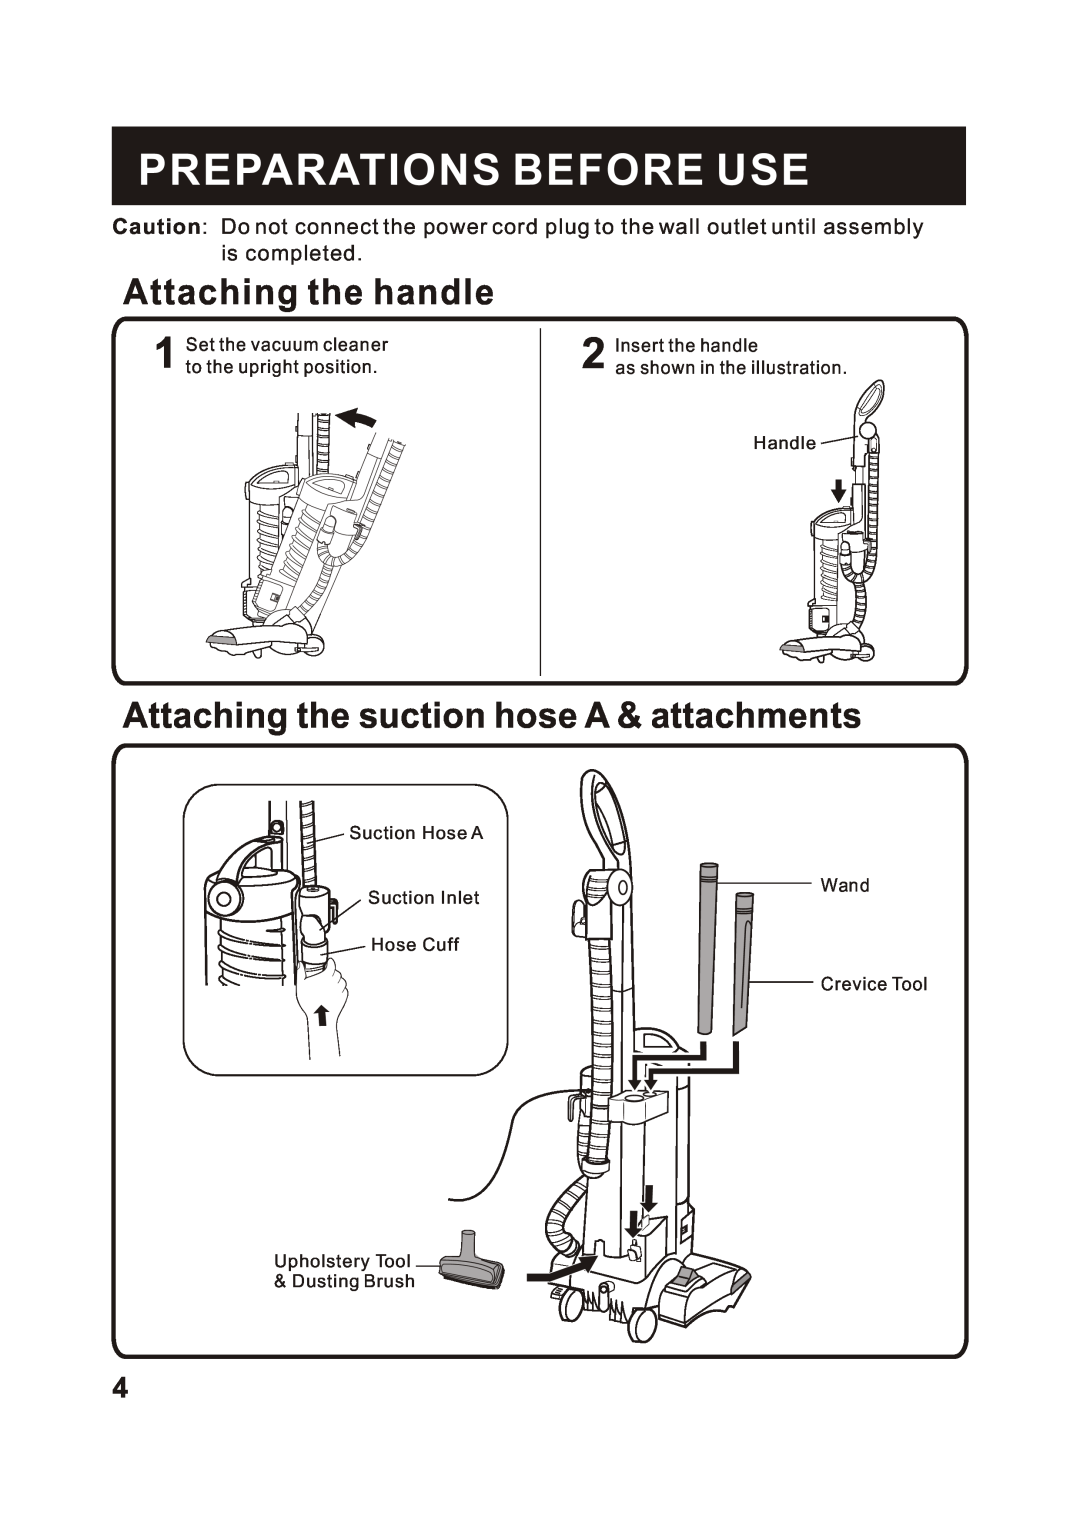 Fantom Vacuum FM741C Preparations Before Use, Attaching the handle, Attaching the suction hose A & attachments 